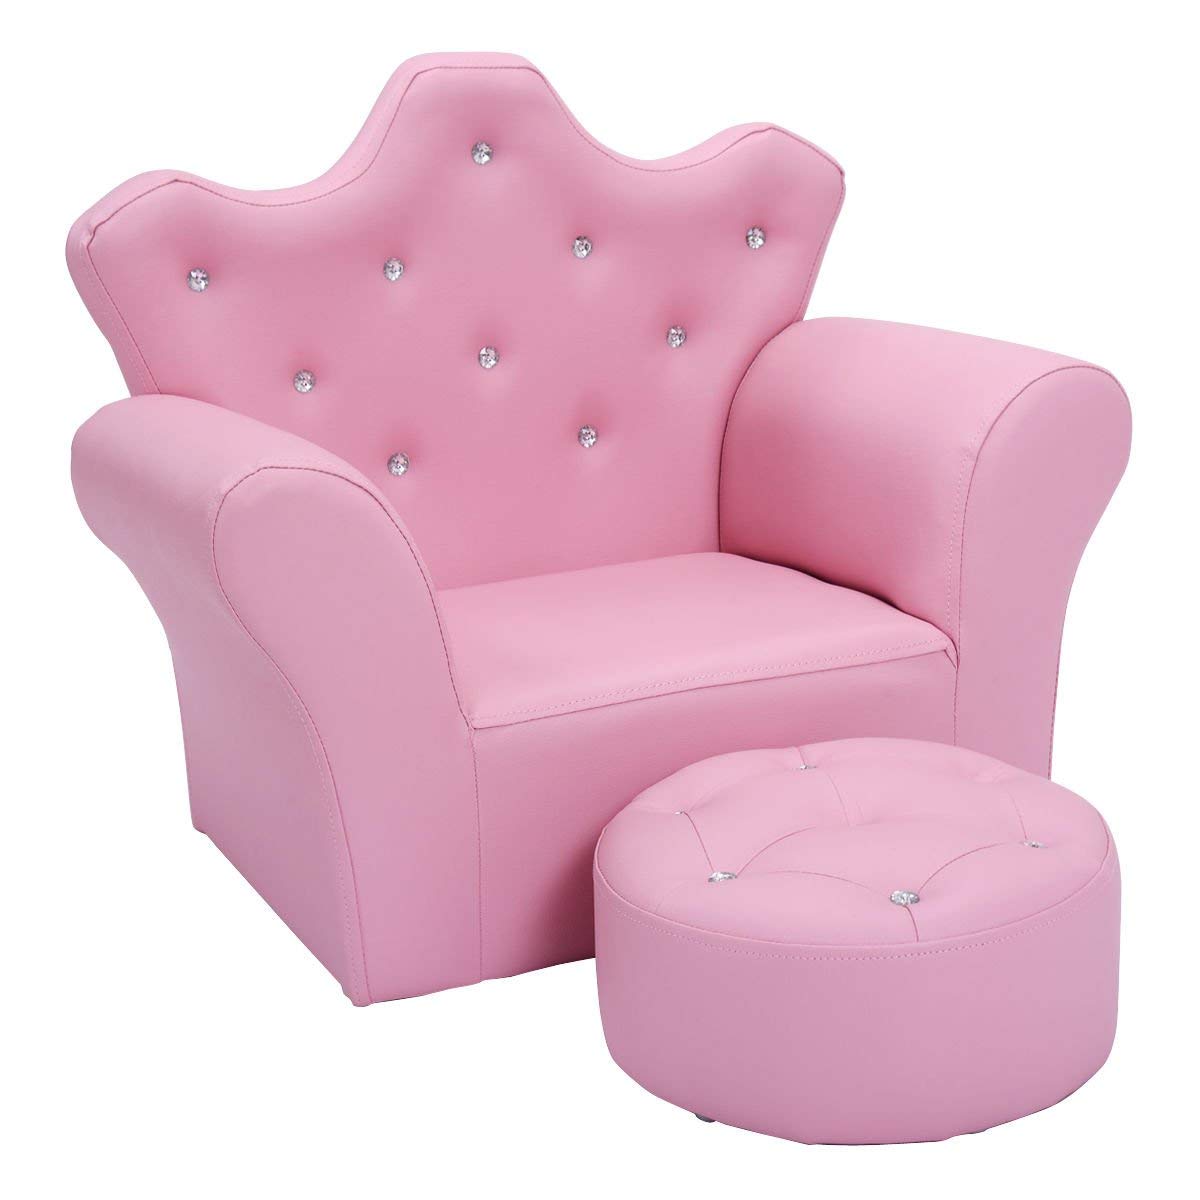 Children's chairs amazon.com: Costzon children's sofa, princess sofa made of synthetic leather with embedded crystal, HVPNMGT